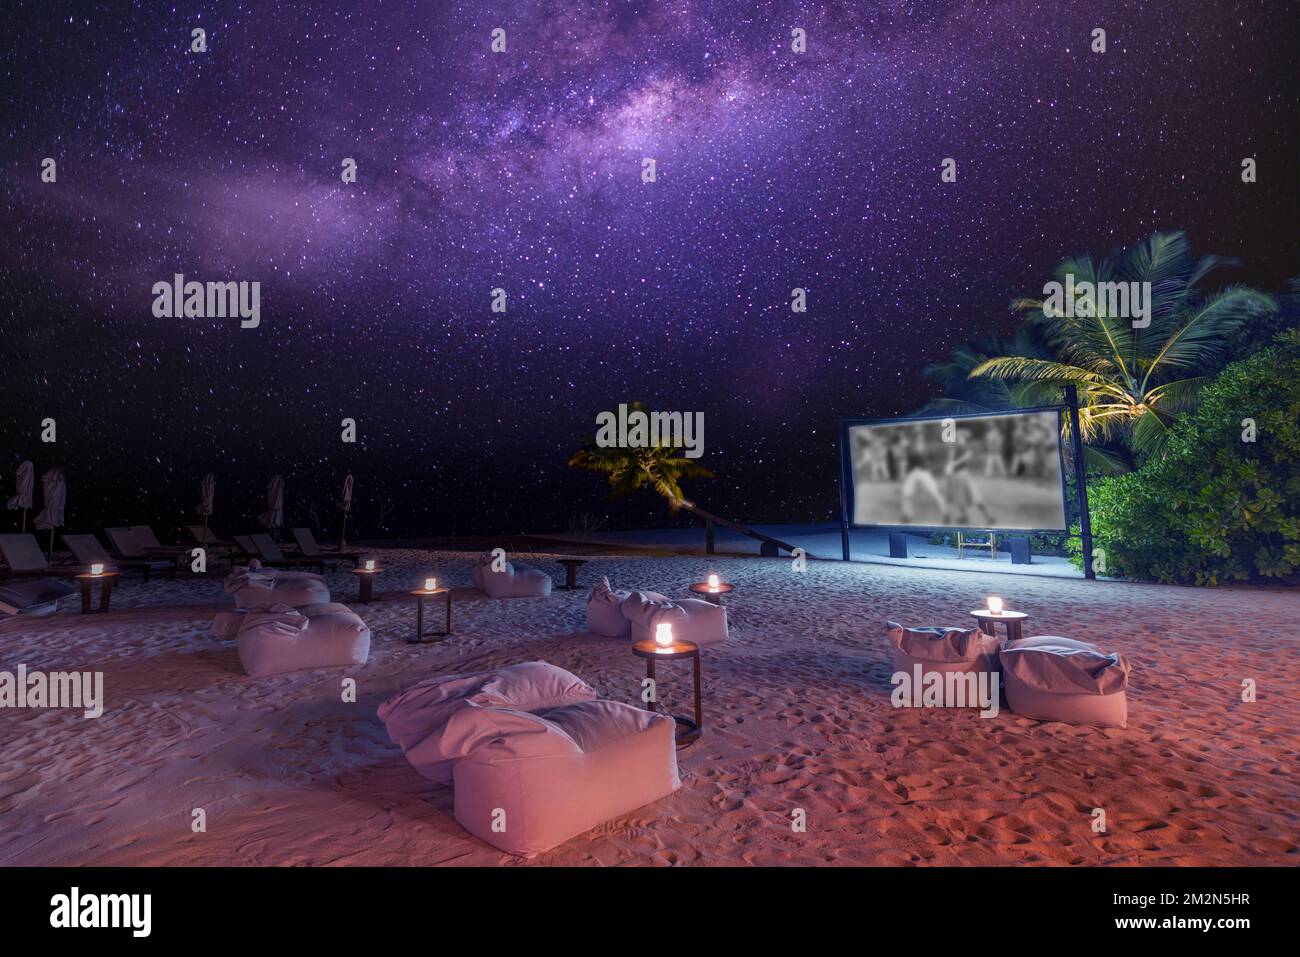 Movie night on starry tropical island beach. Amazingly calm and relaxed scenic view of outdoor cinema with the Milky Way and palm trees soft candles Stock Photo